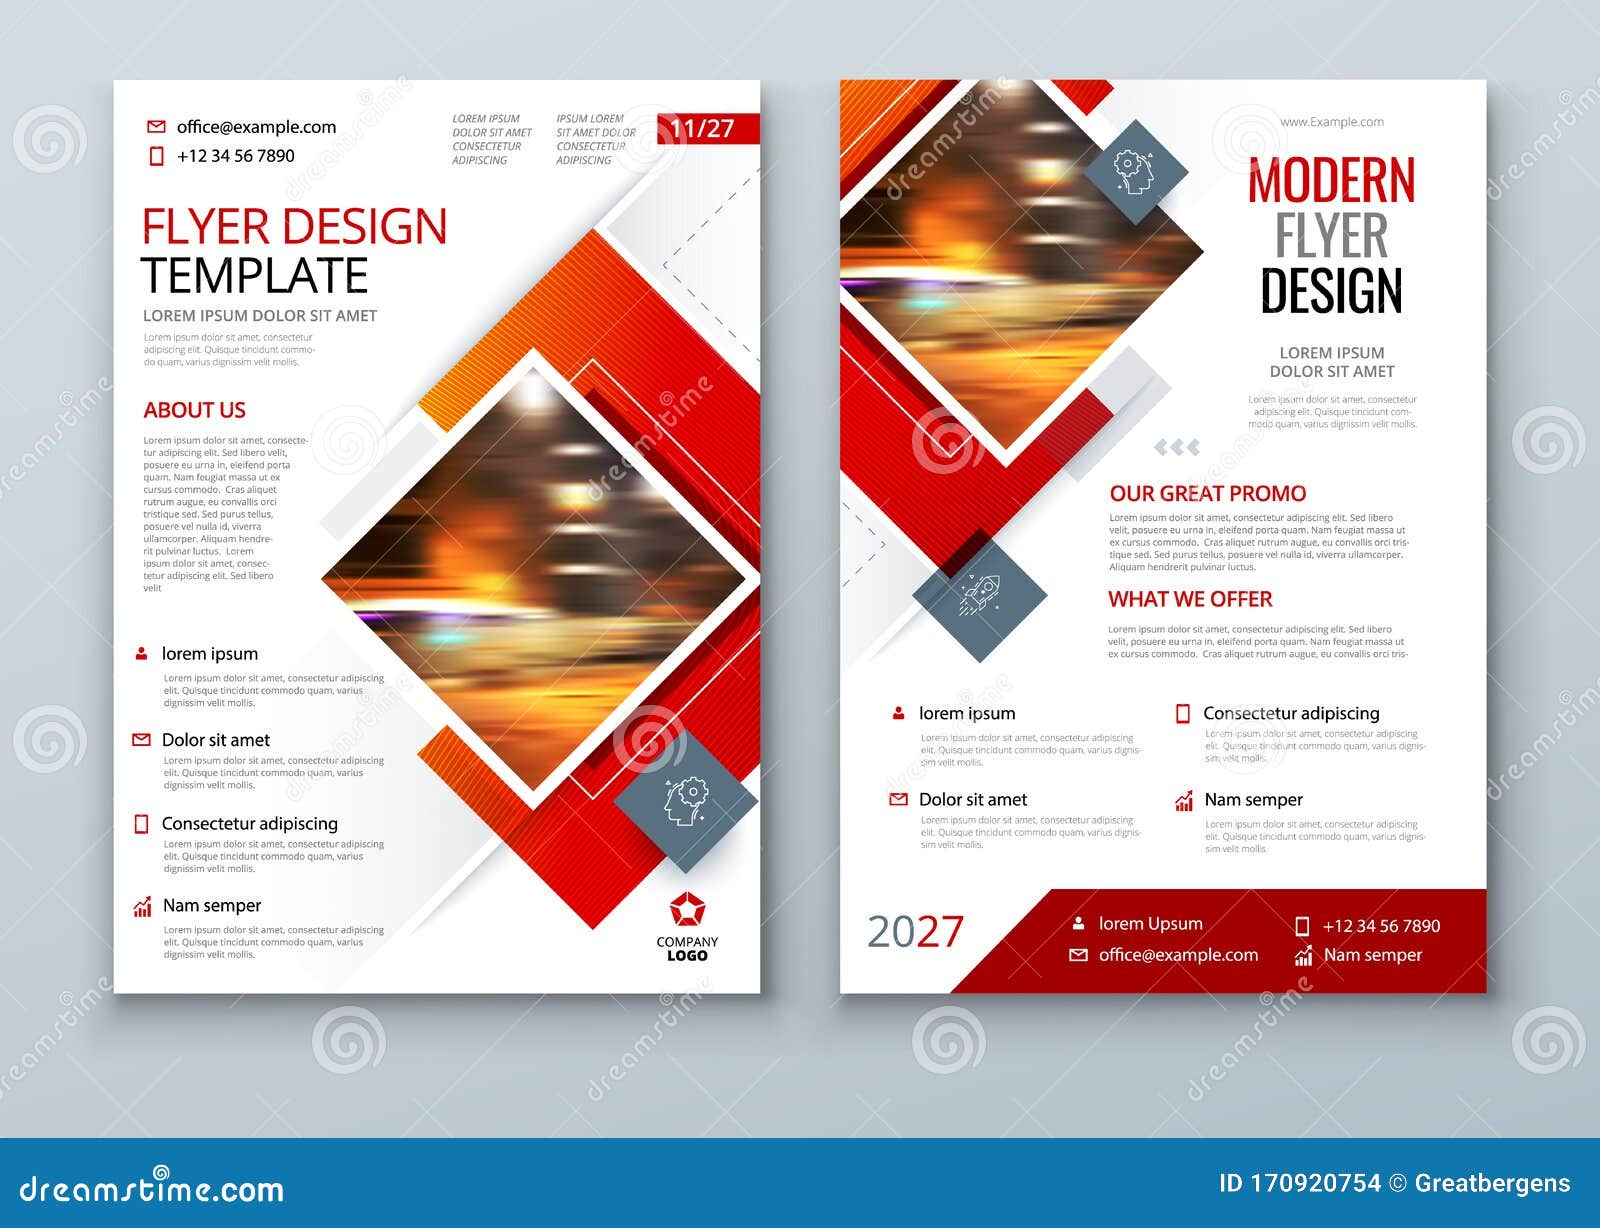 Flyer Design Red Modern Flyer Background Design Template Layout For Flyer Concept With Square Rhombus Shapes Vector Stock Vector Illustration Of Line Font